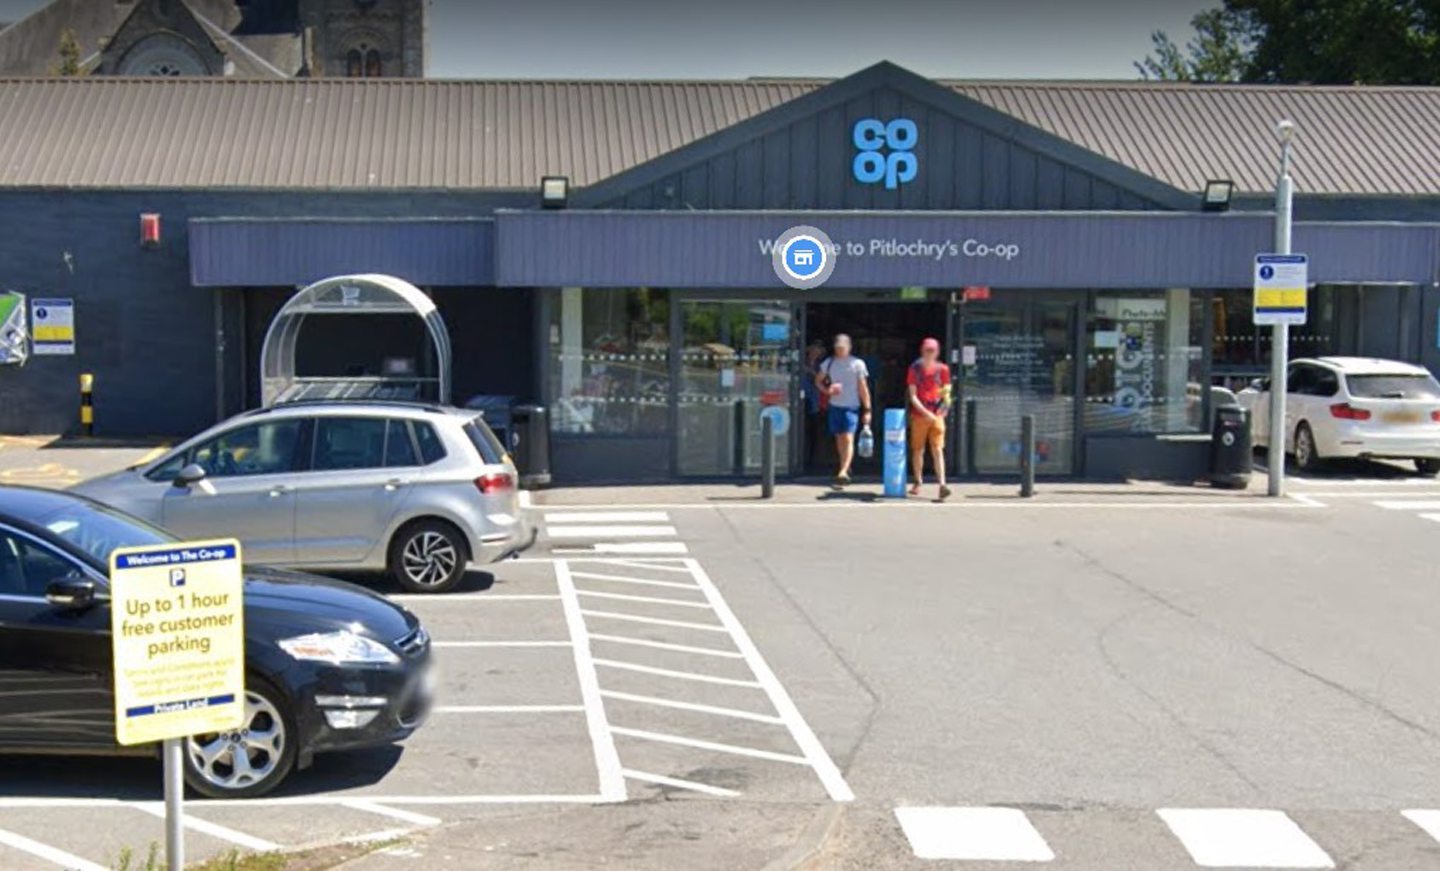 The Co-op in Pitlochry.